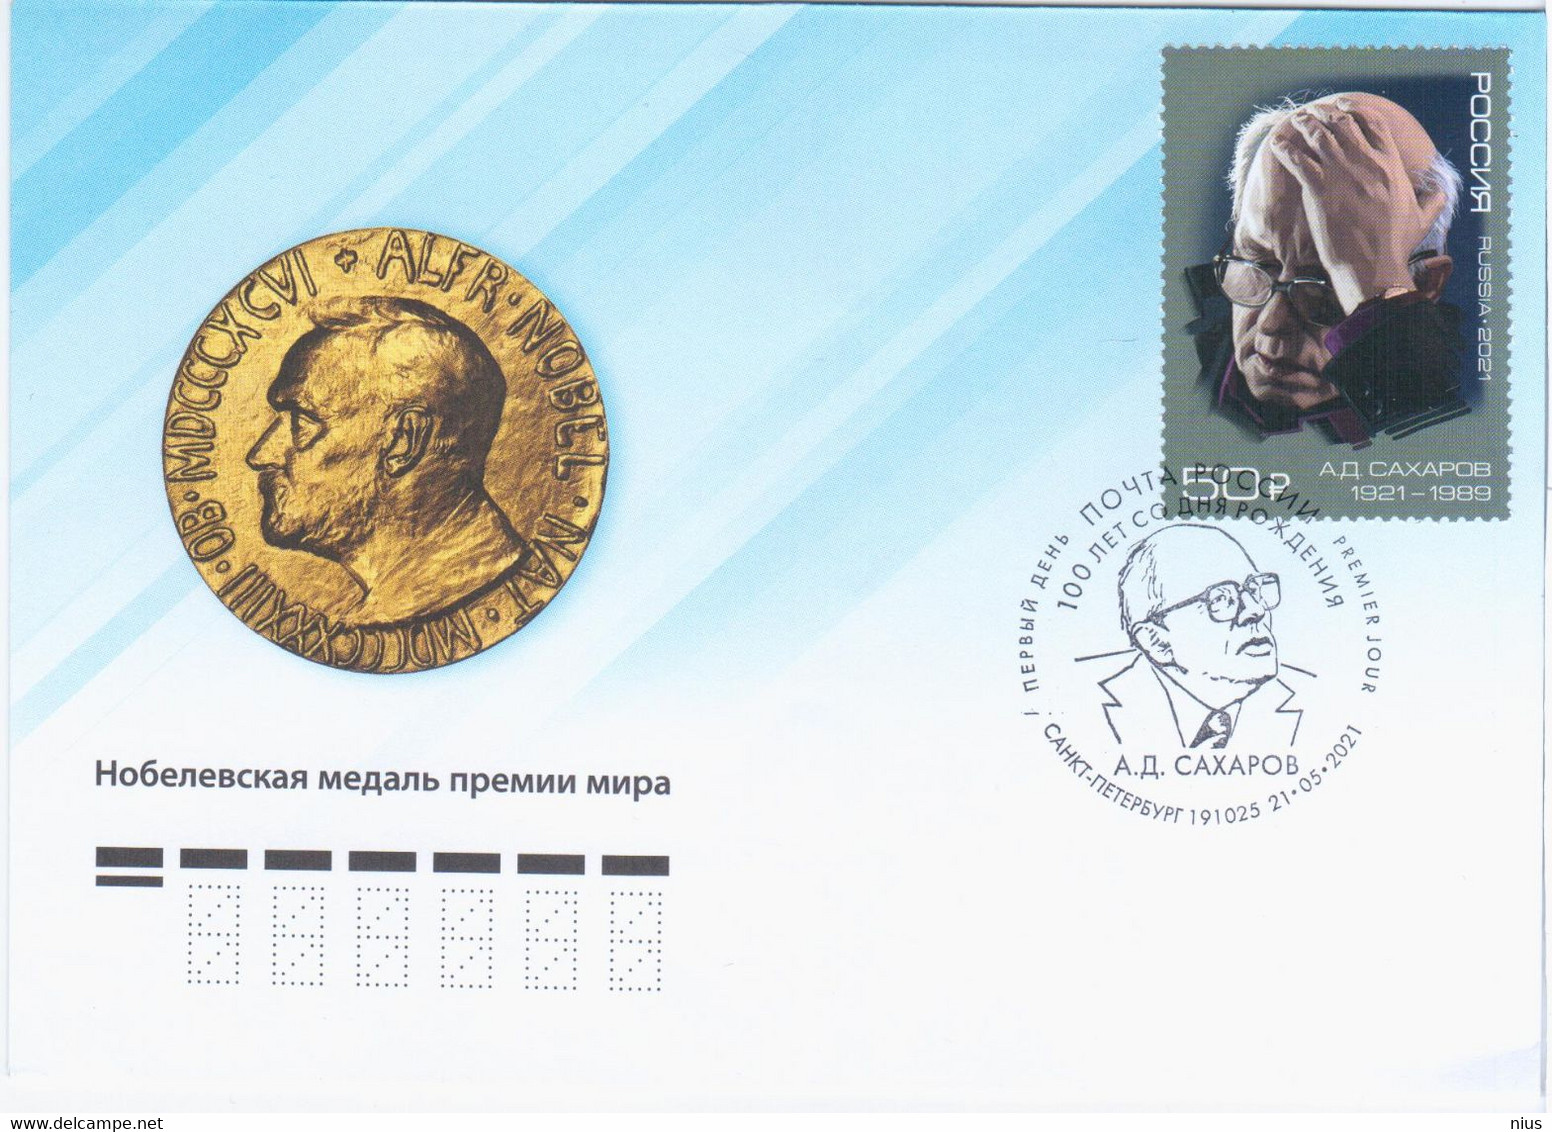 Russia 2021 FDC Andrei Sakharov, Soviet Physicist Physics, Academician, Nobel Laureate - FDC